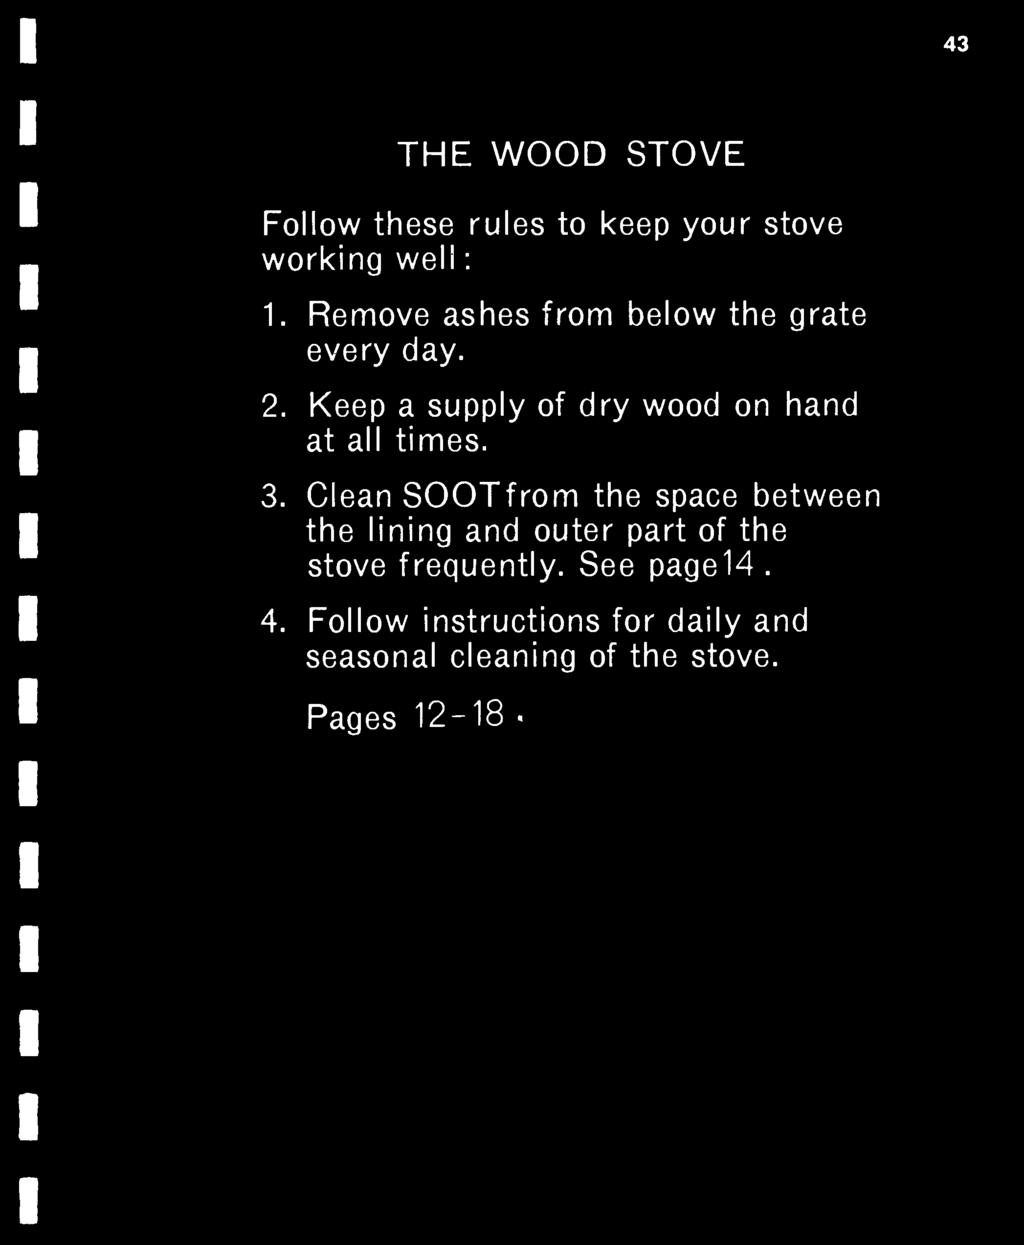 43 THE WOOD STOVE Follow these rules to keep your stove working well : 1. Remove ashes from below the grate every day. 2. Keep a supply of dry wood on hand at all times. 3.